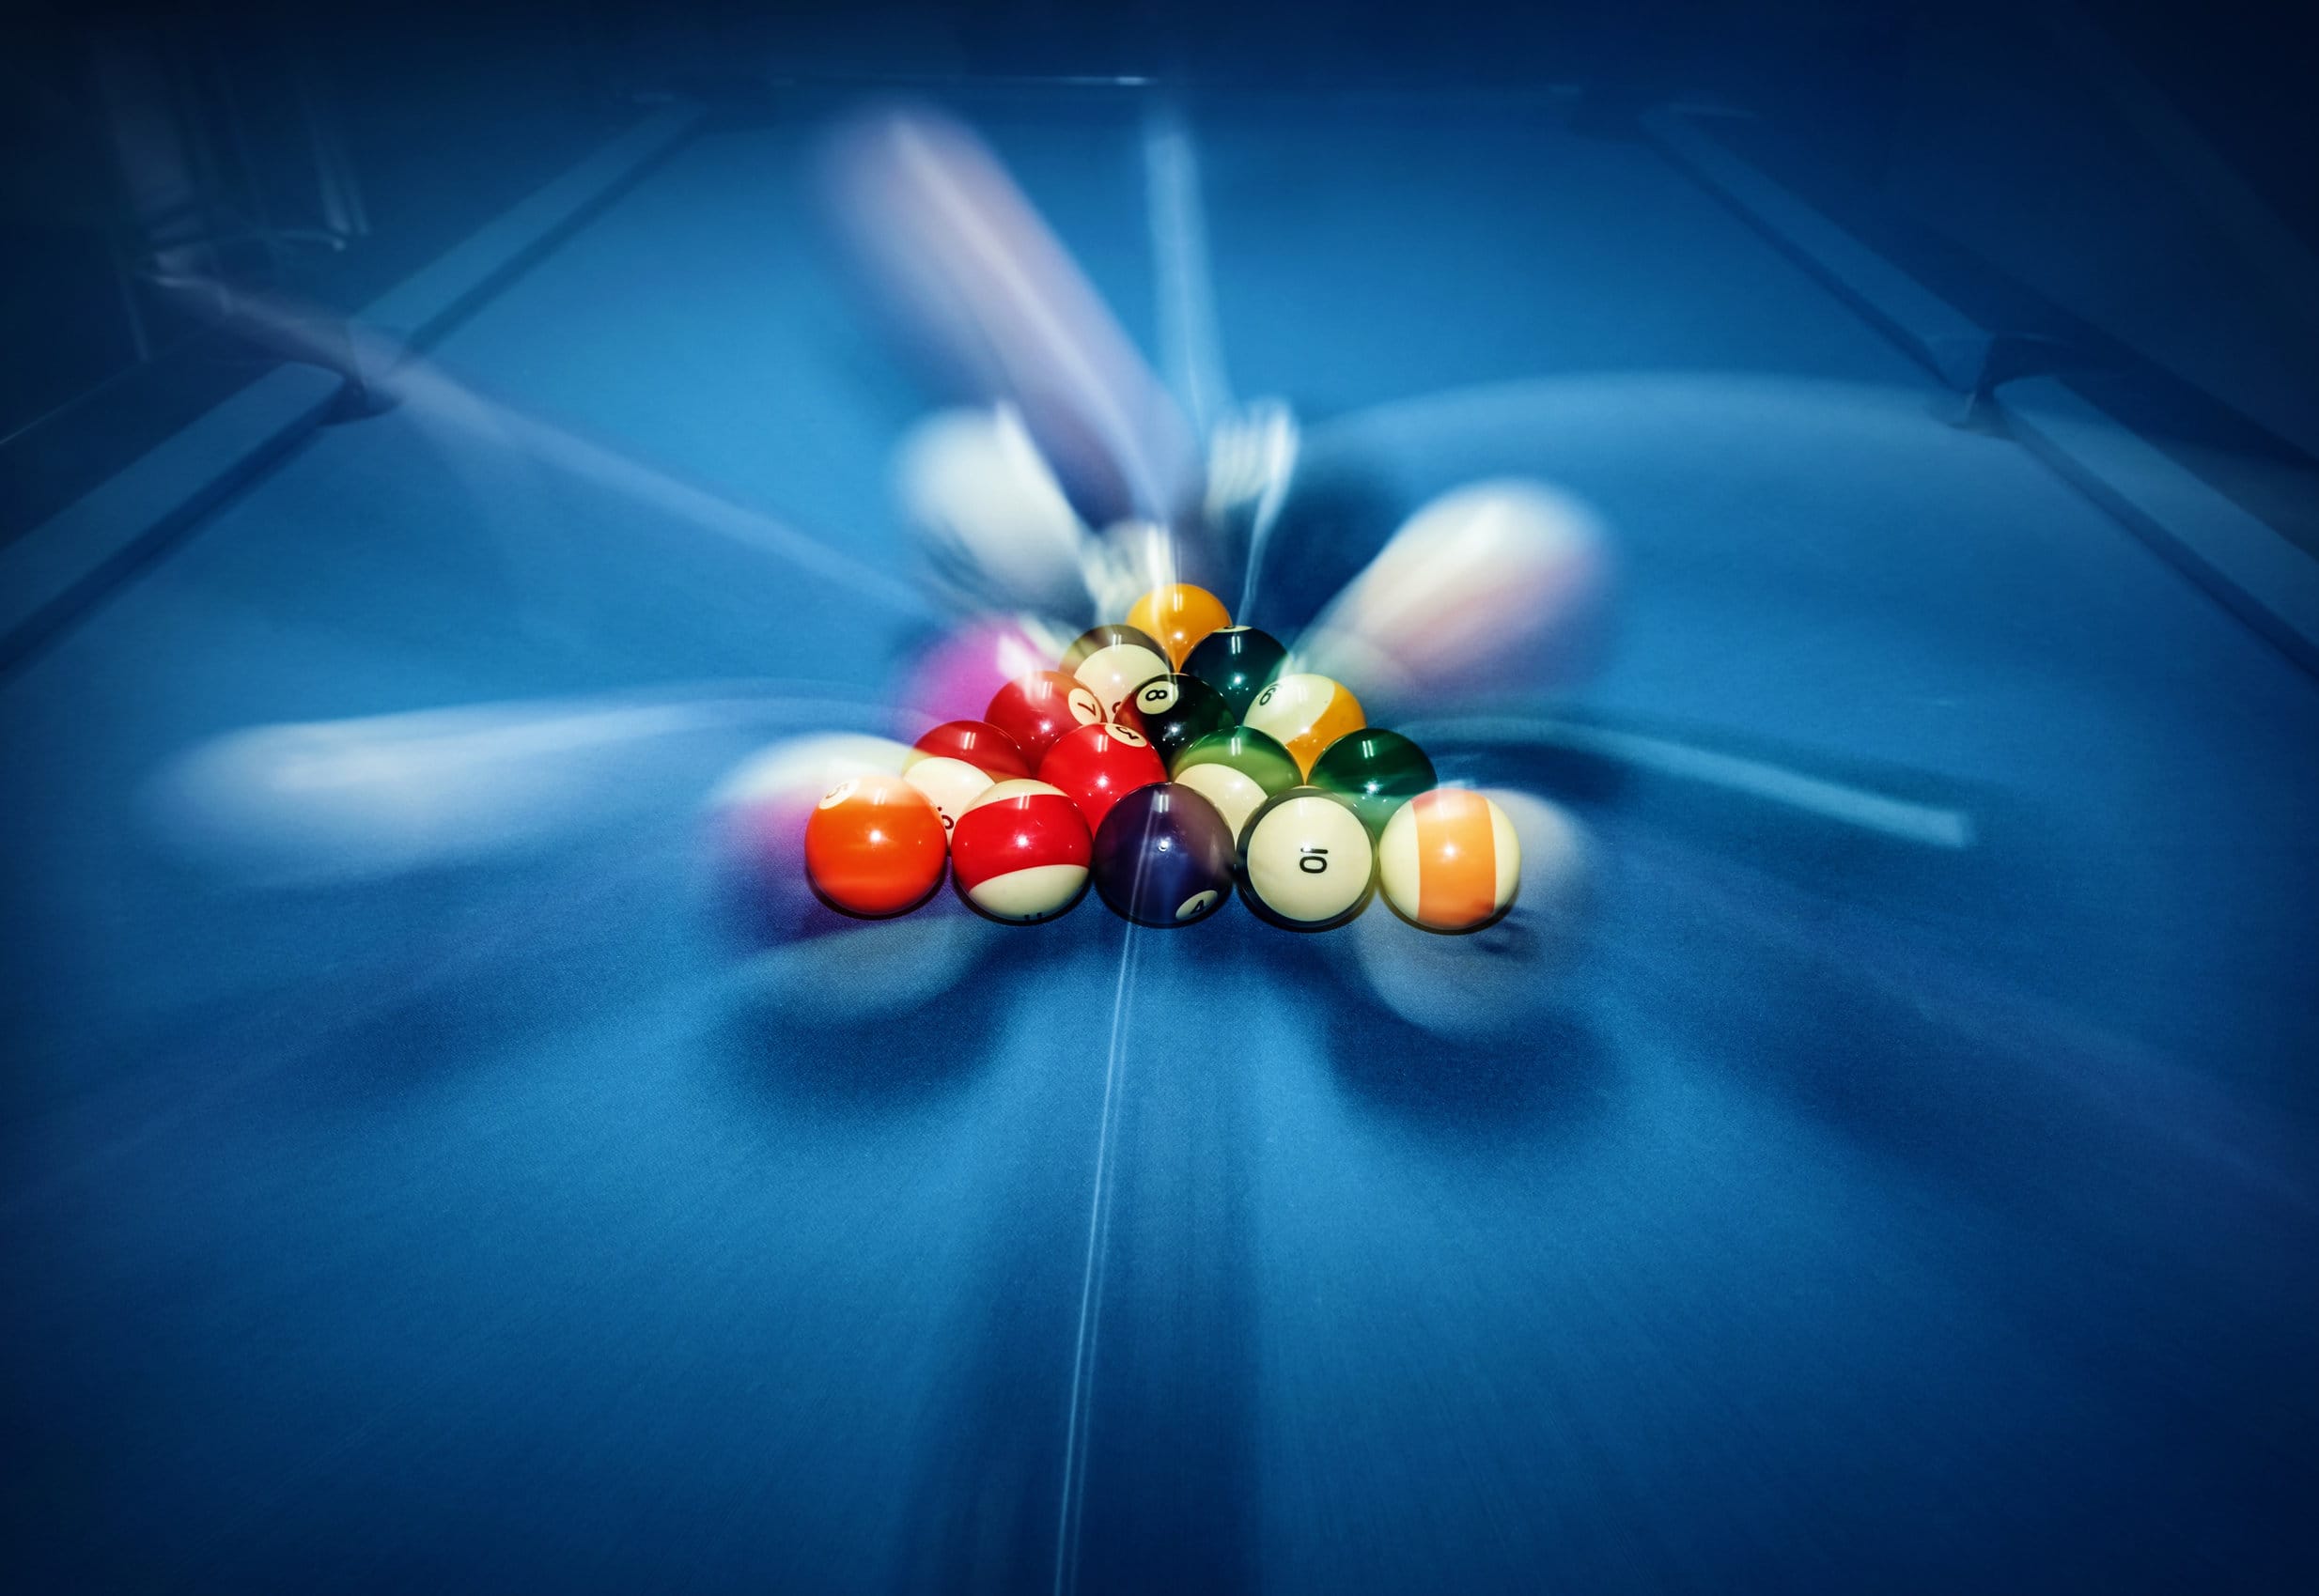 Blue billiard table with colorful balls, beginning of game, slow motion, soft focus, snooker bar, entertainment in nightclub, hobby and sport concept